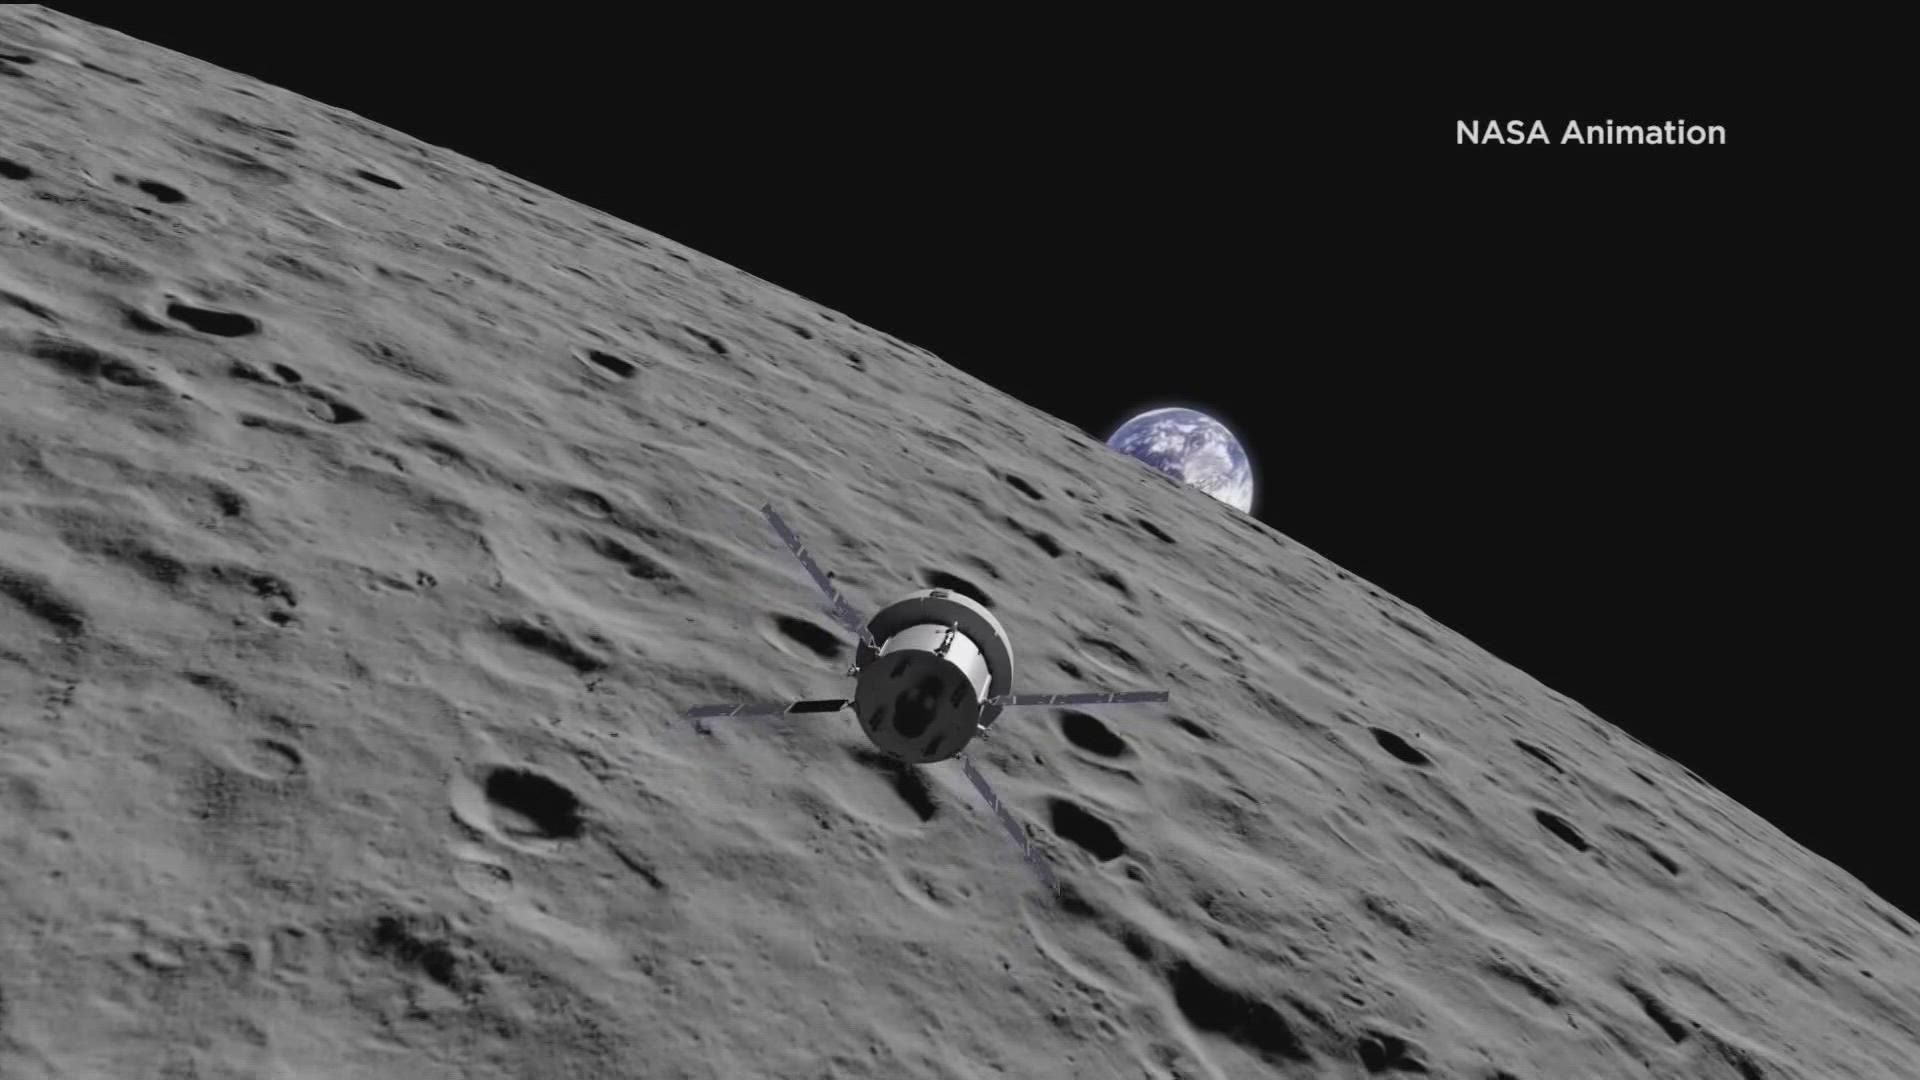 The unmanned spacecraft is headed back to earth after making its second close flyby of the moon.